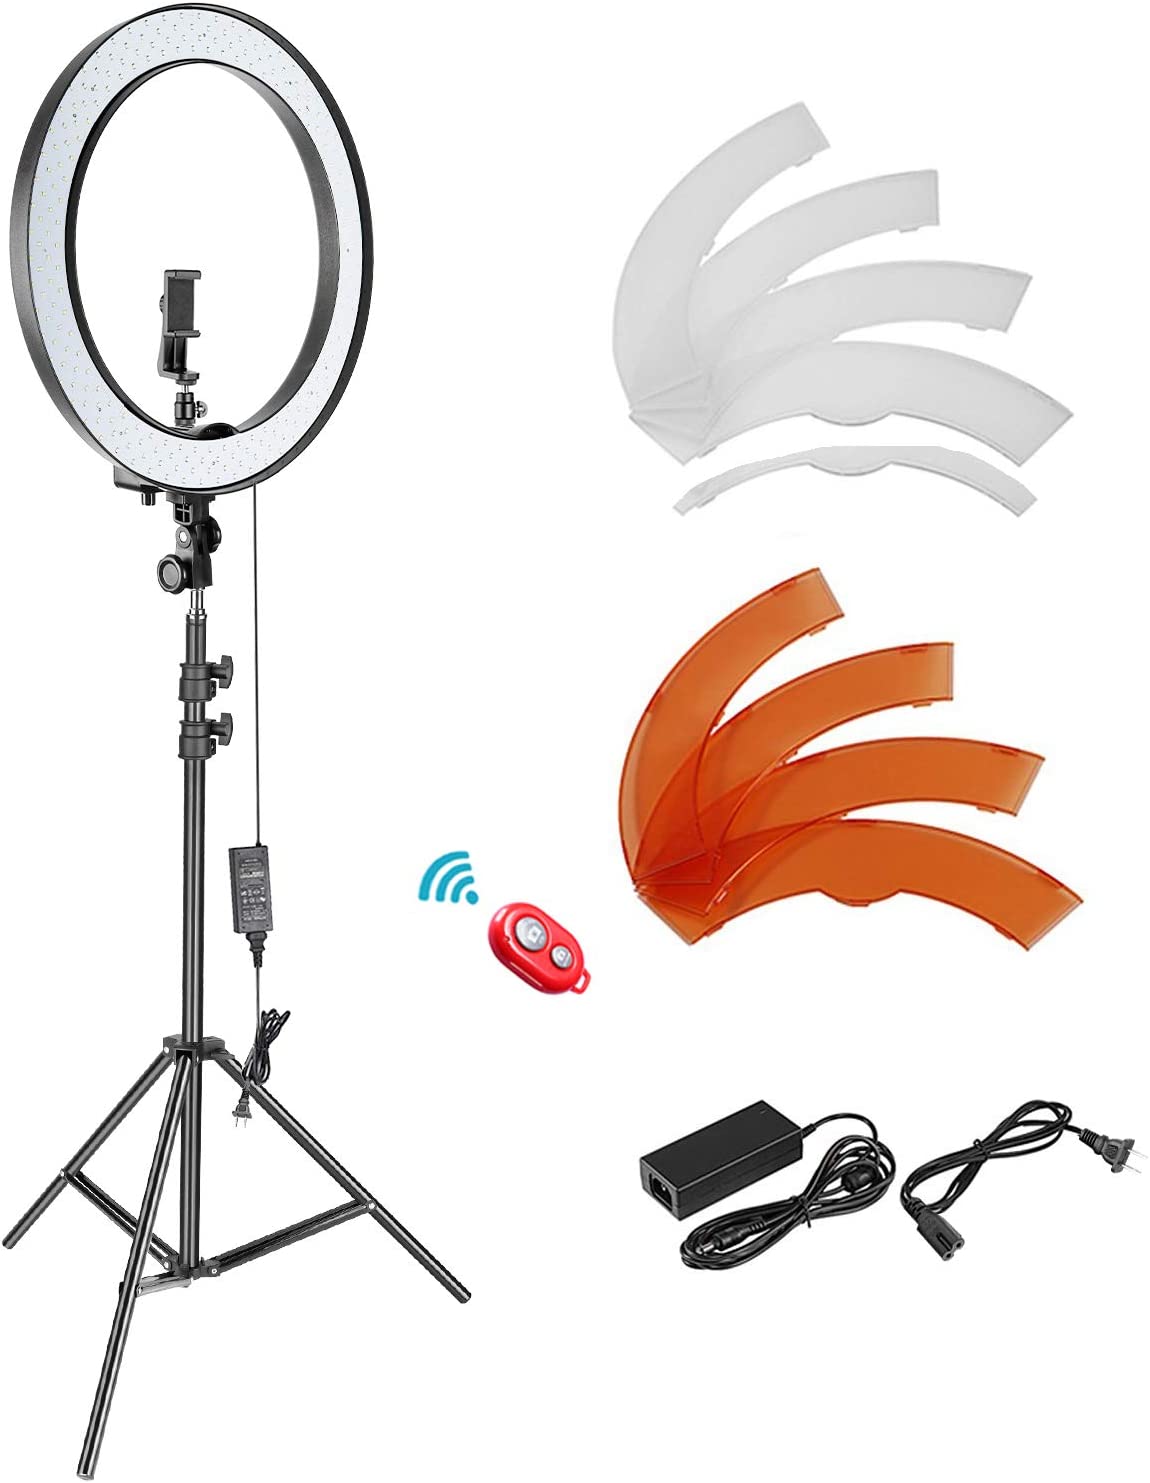 18 inch Ring Light with tripod and accessories